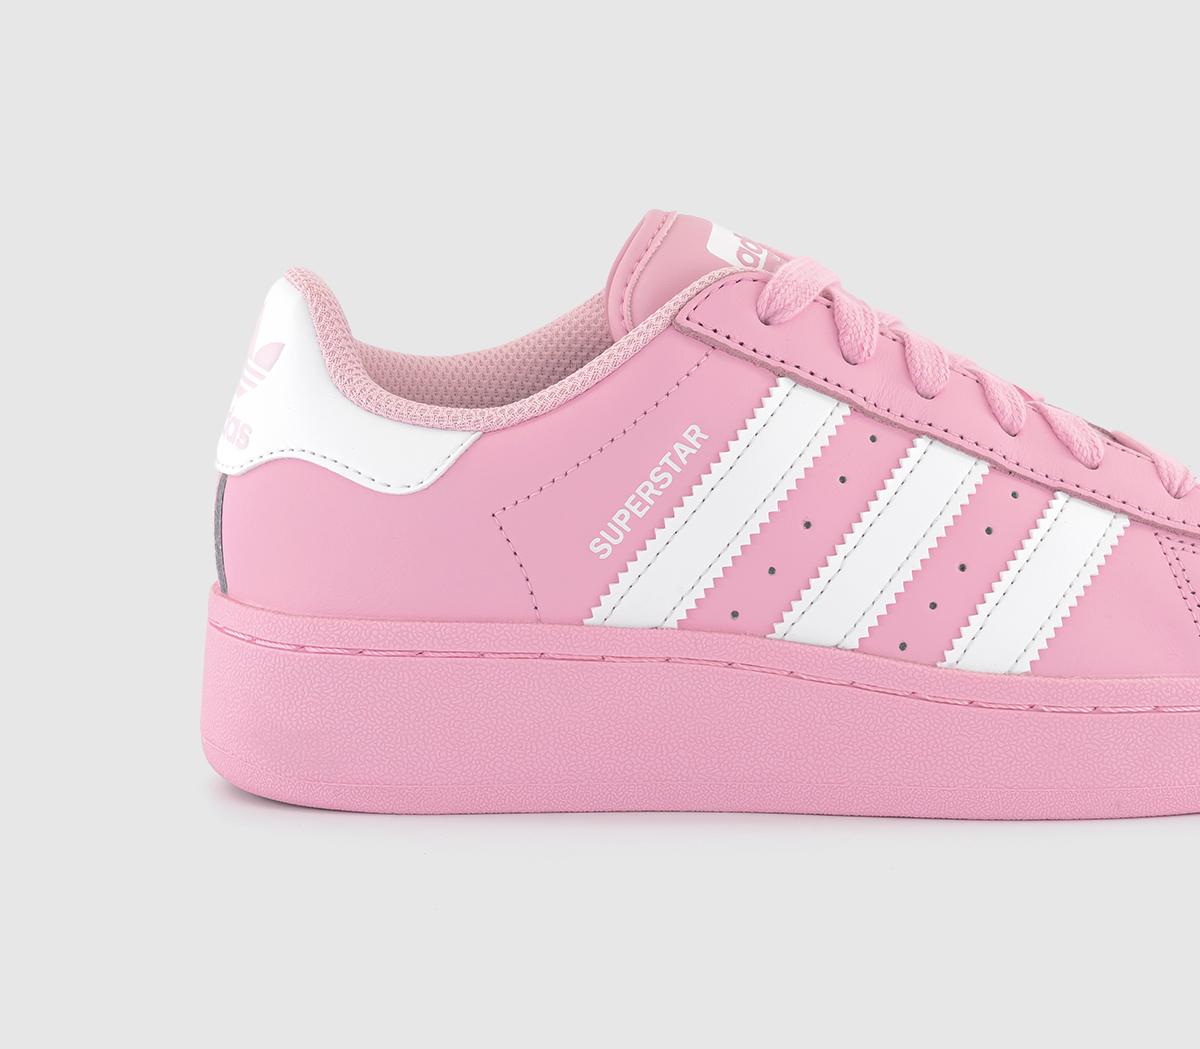 adidas Superstar XLG Trainers True Pink White True Pink - Women's Trainers